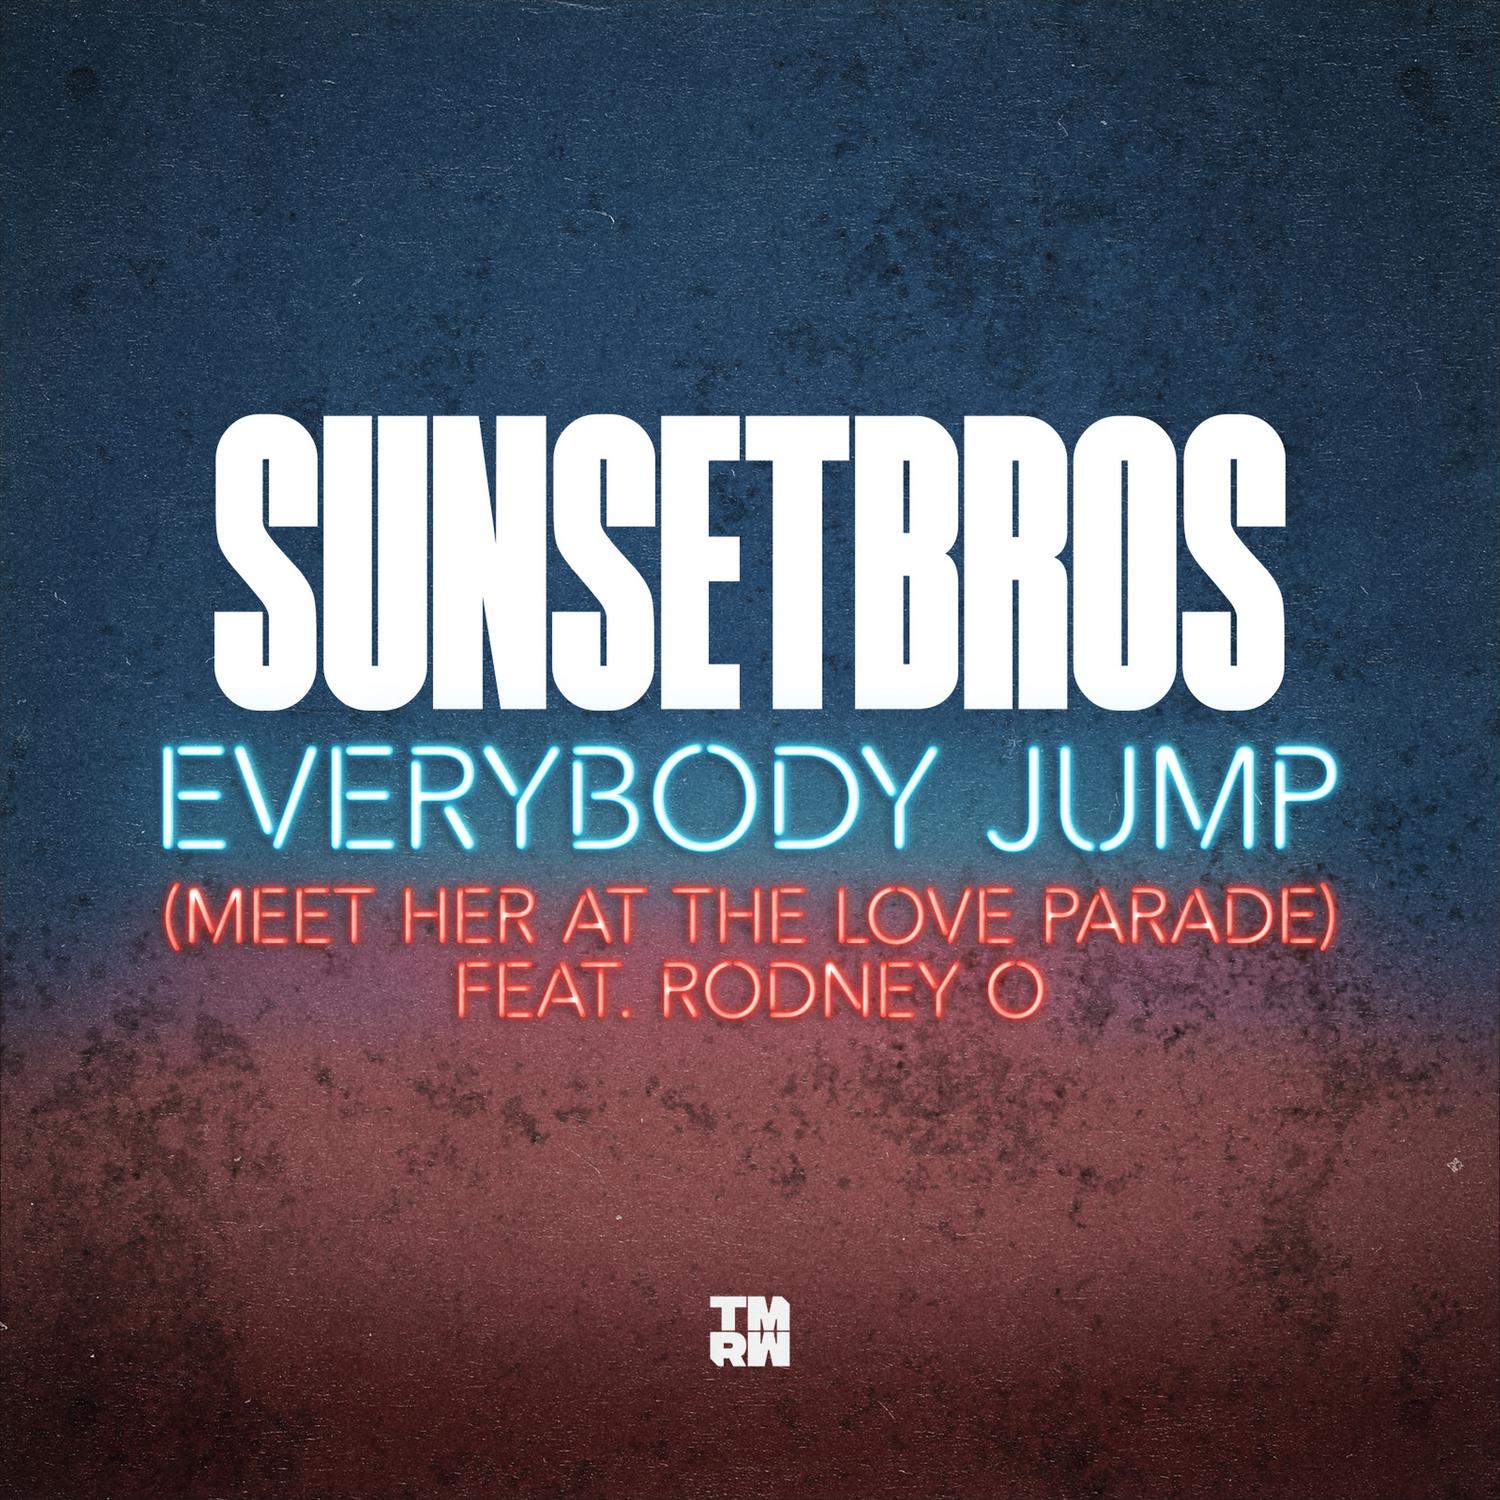 Sunset Bros - Everybody Jump (Meet Her At The Love Parade)